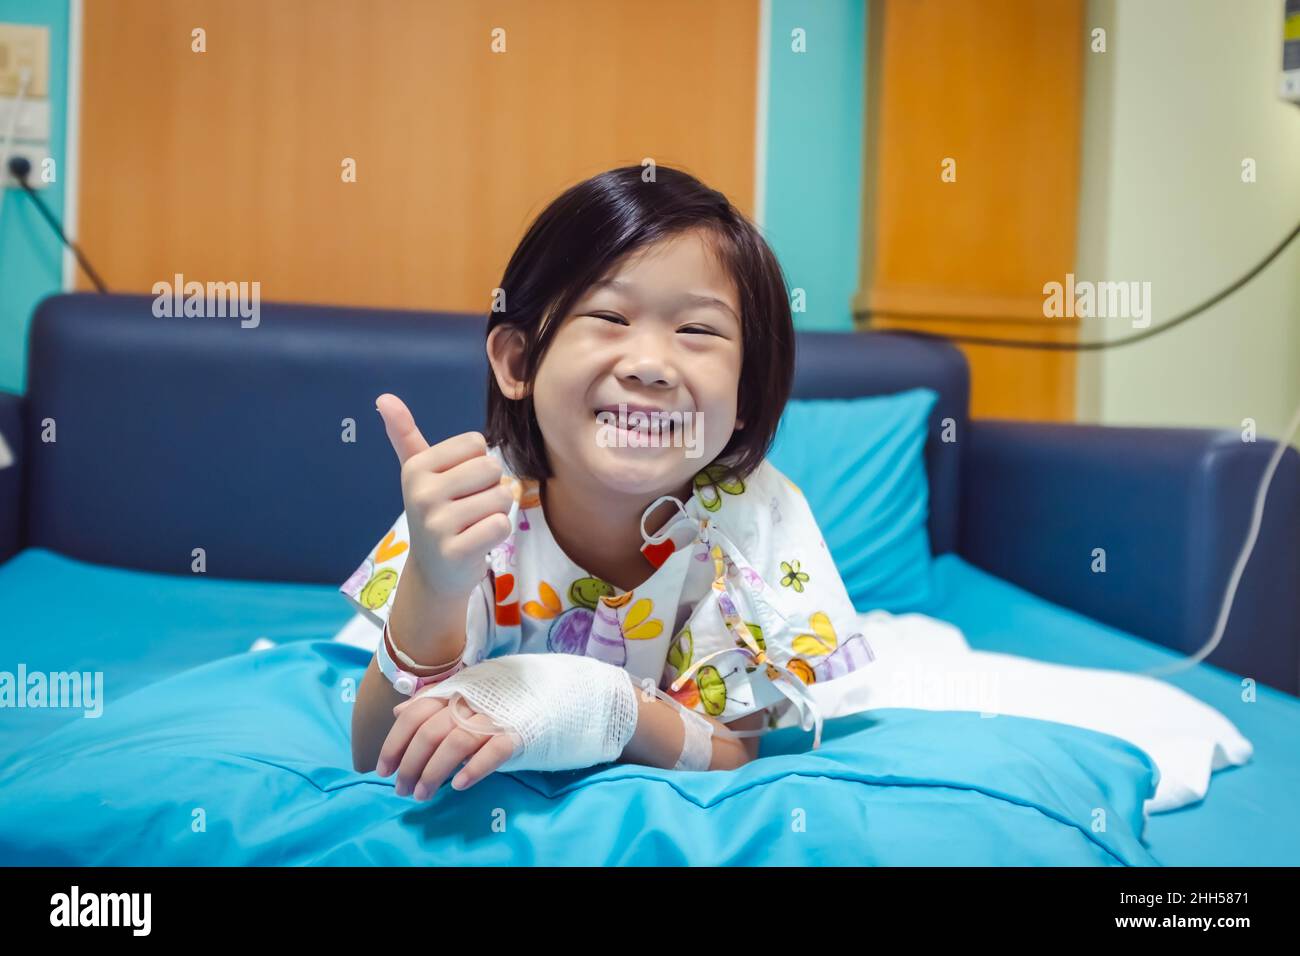 Illness asian child smiling happily and showing thumb up hand sign. Girl admitted in hospital while saline intravenous (IV) on hand. Health care stori Stock Photo